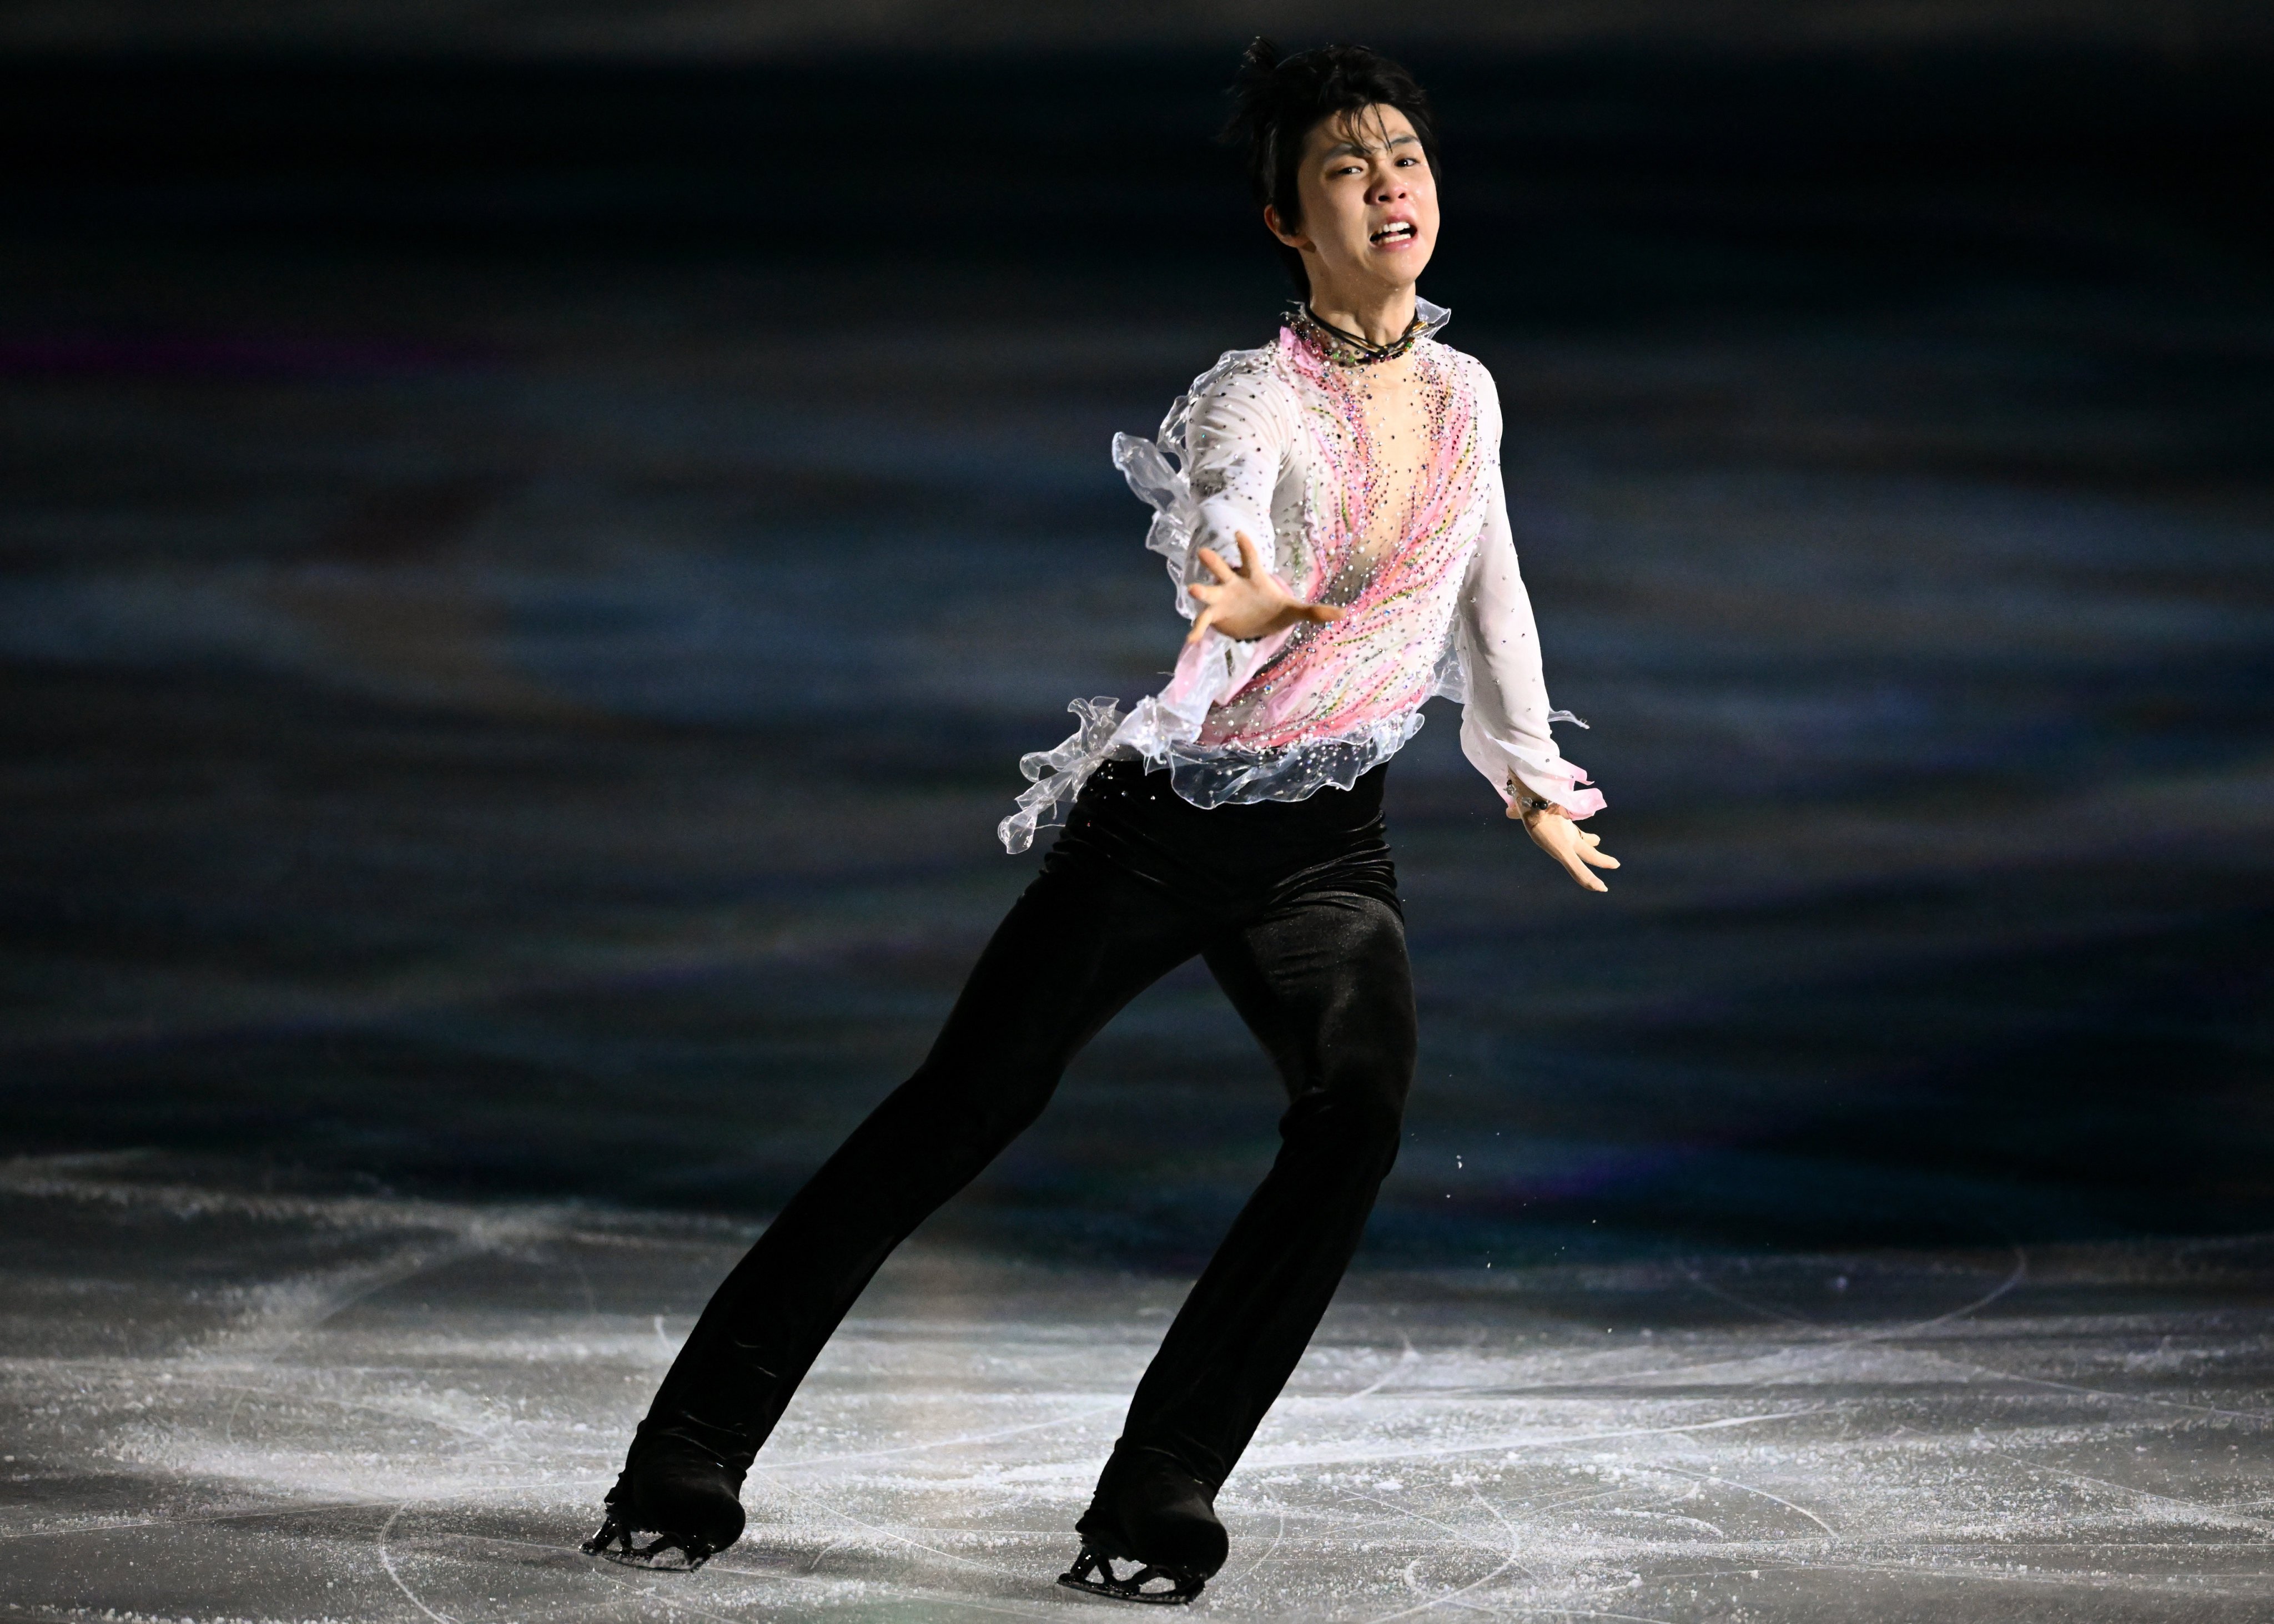 Winter Olympics Japans Ice Prince Yuzuru Hanyu thrills fans as figure skaters let loose at Games gala South China Morning Post